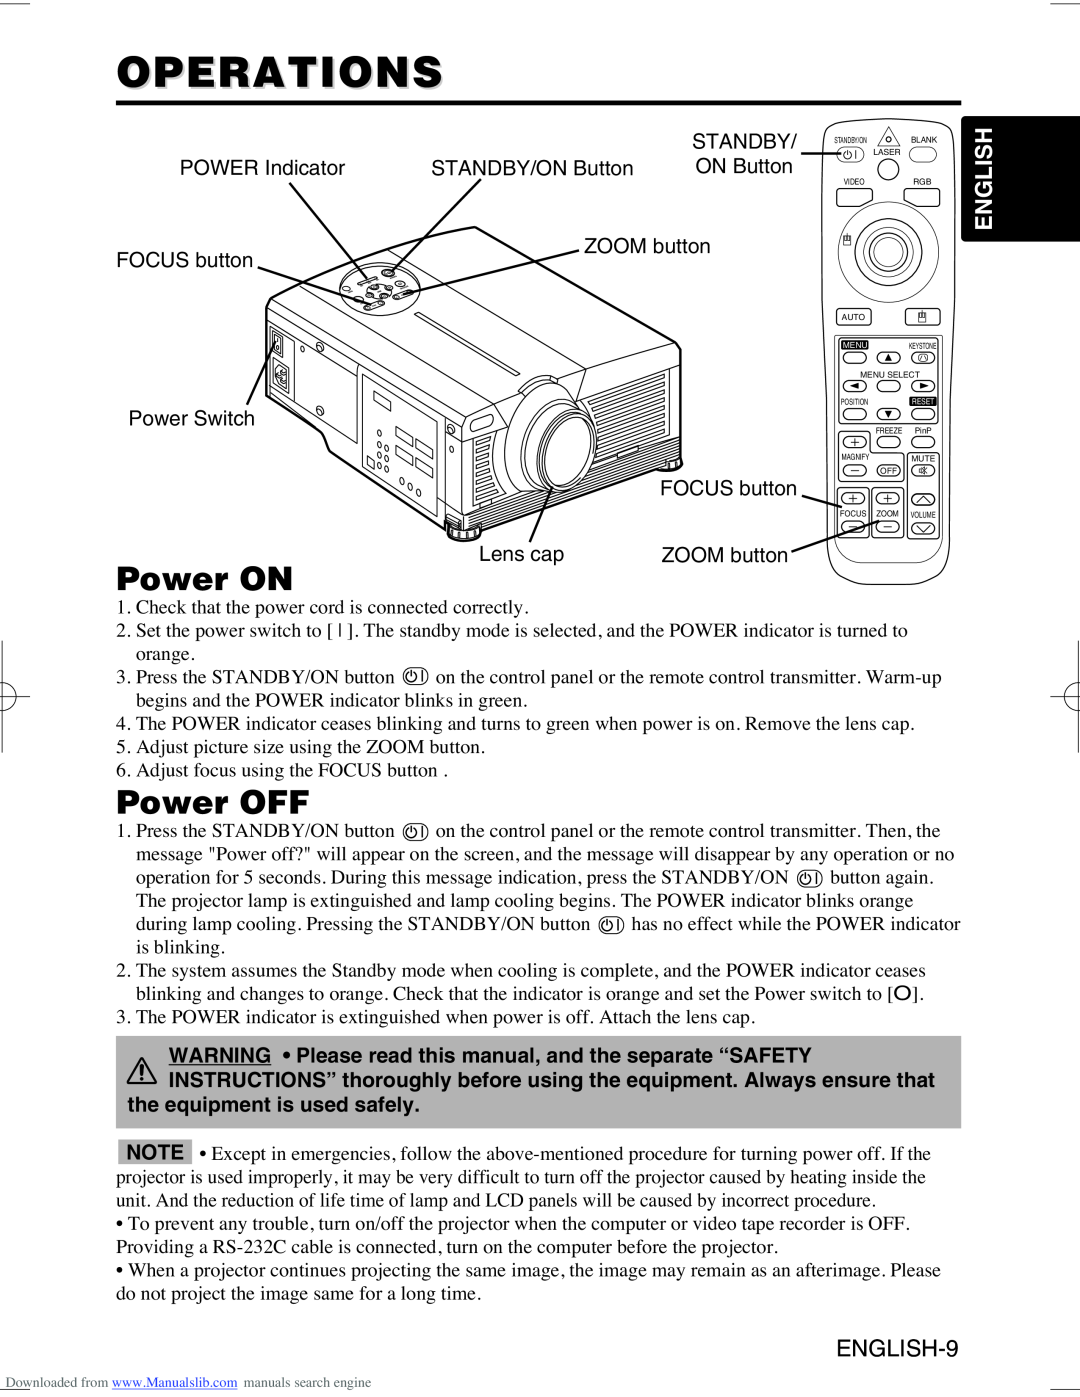 Hitachi CP-X995W user manual Operations, Power ON, Power OFF, English 